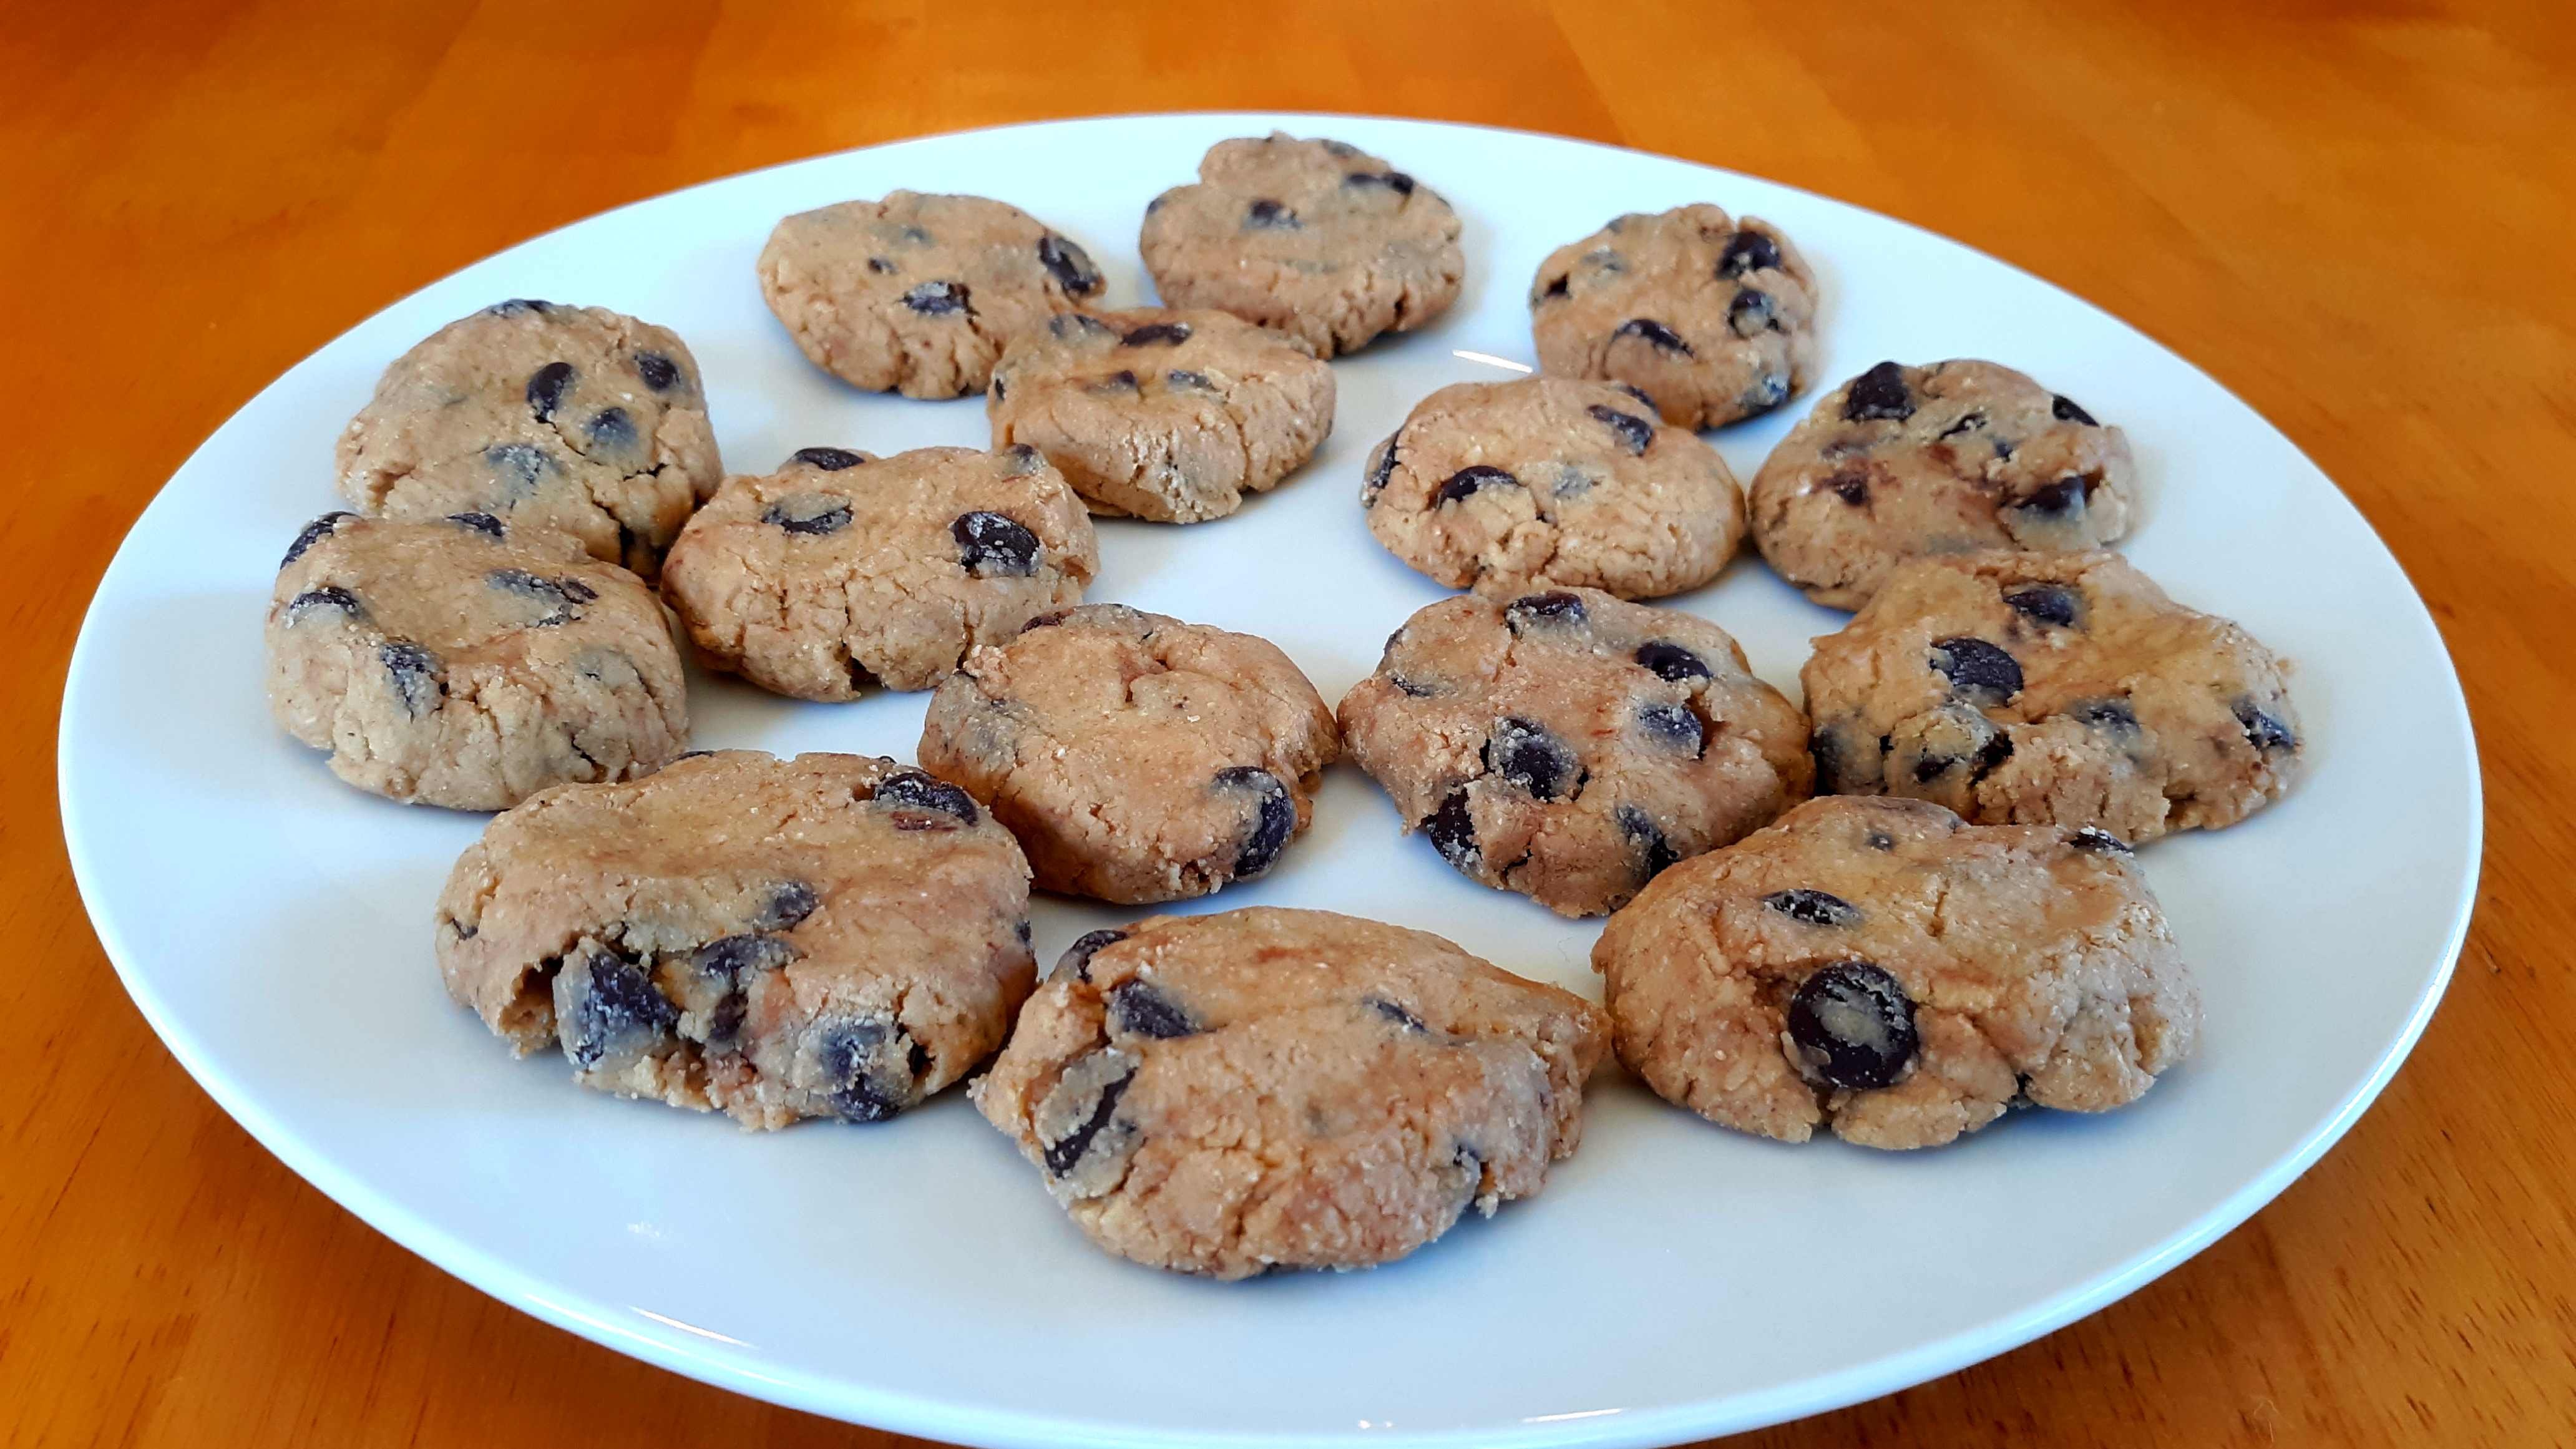 SUGAR FREE/LOW CARB FROZEN CHOCOLATE CHIP COOKIES